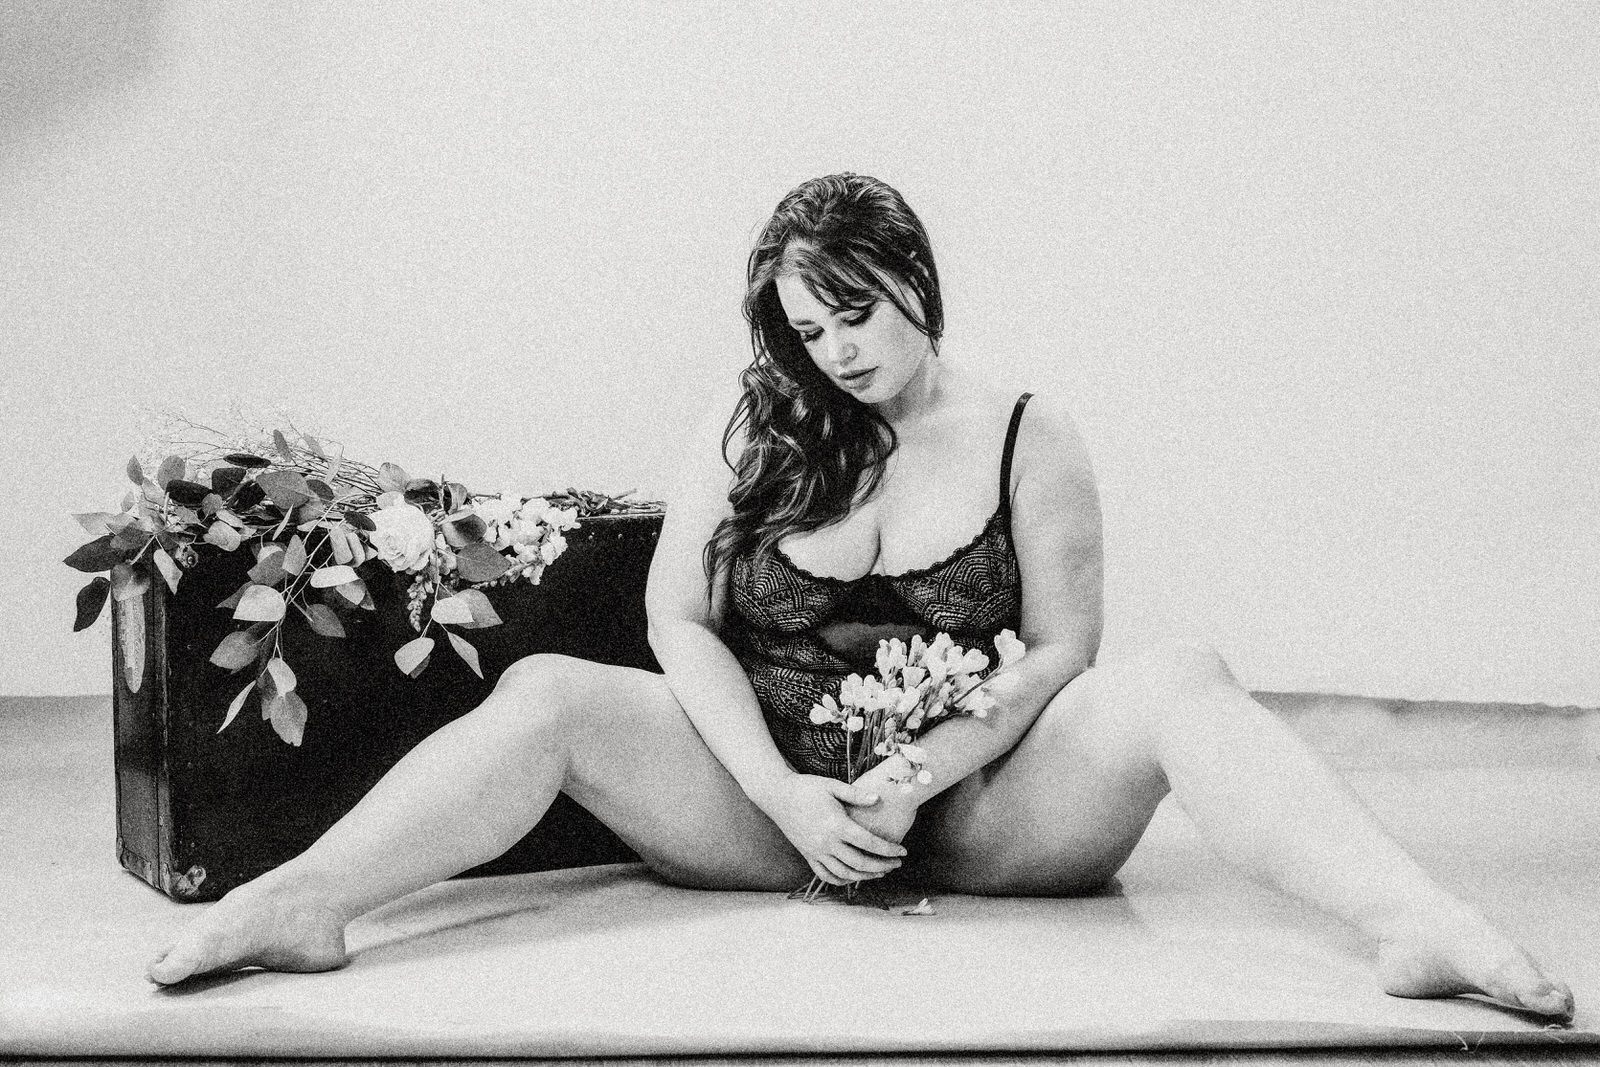 Plus size boudoir photo of a woman sitting on the floor with legs apart holding flowers